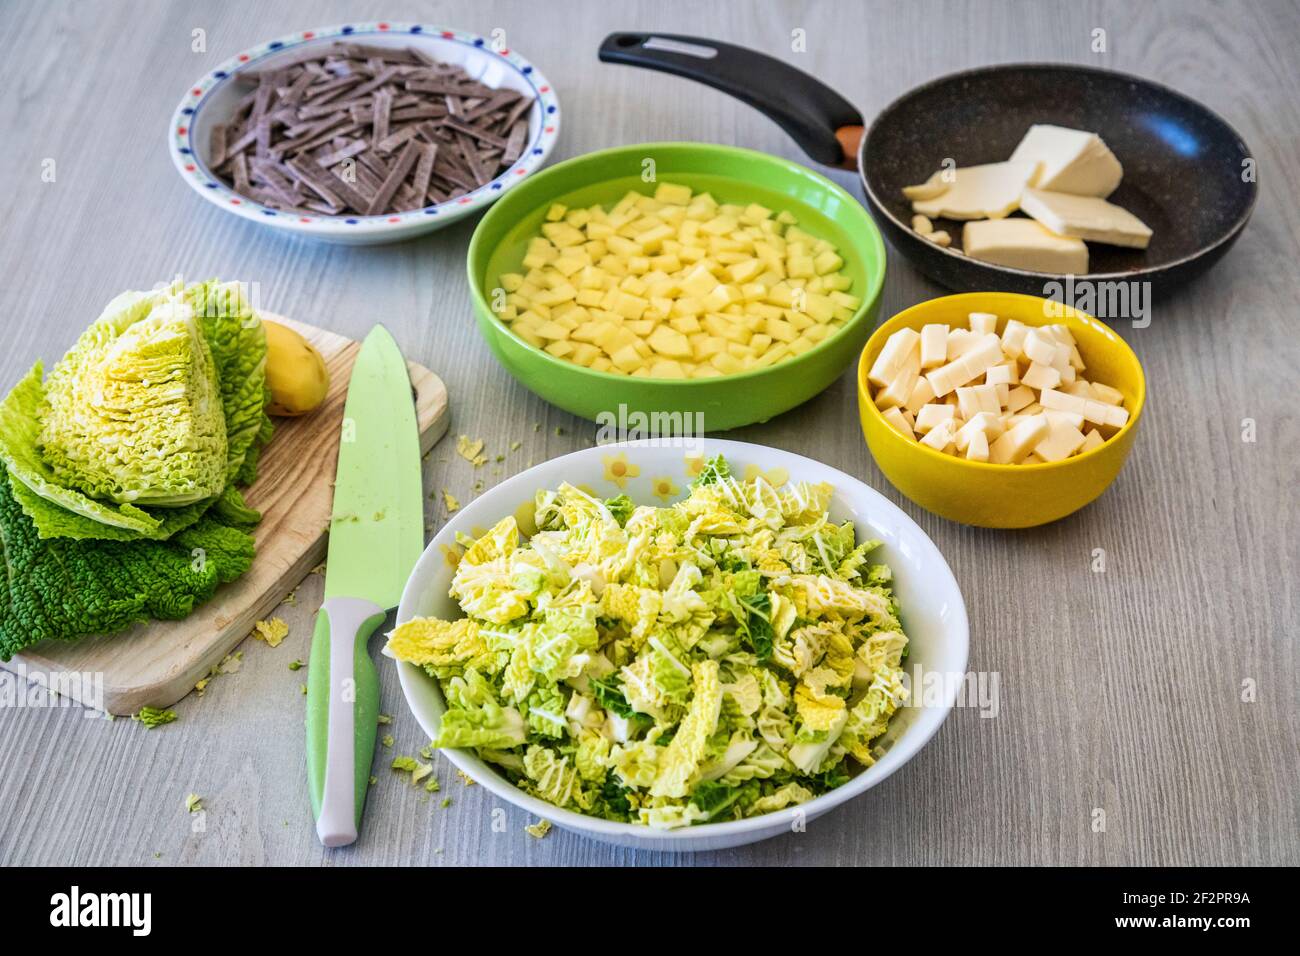 diced potatoes, cabbage, cheese, melted butter and garlic: ingredients for the preparation of Pizzoccheri, a typical dish from Valtellina (Italy) and the canton of Graubünden (Switzerland) Stock Photo